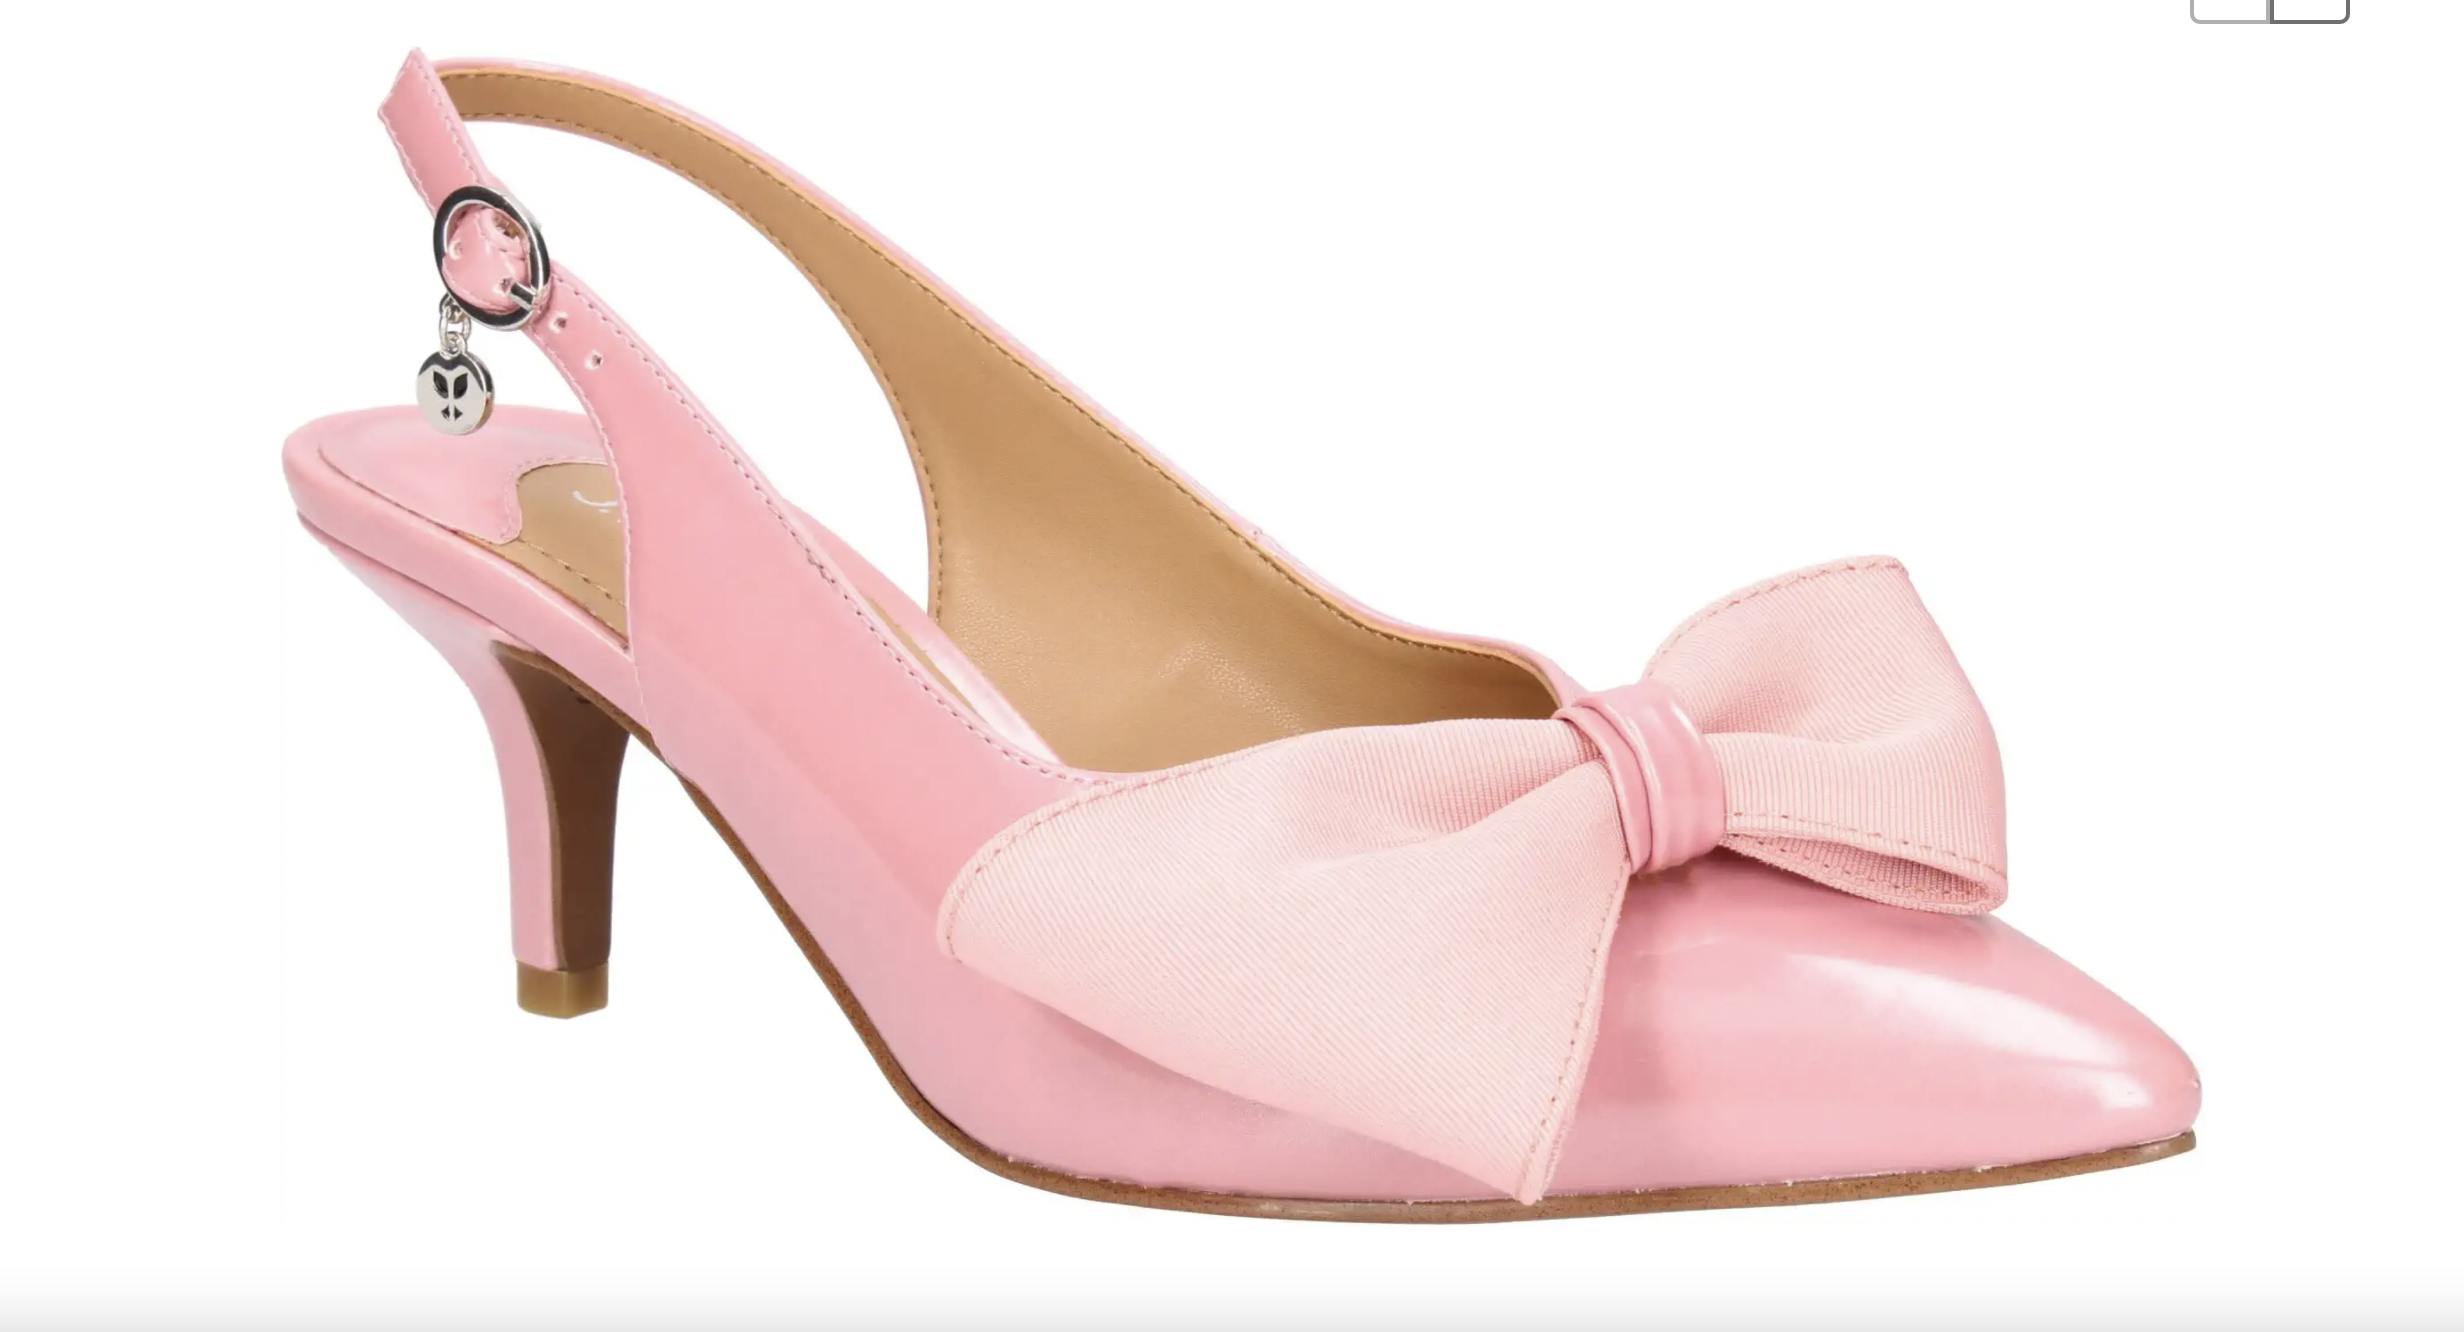 Pearl flower wedding shoes in pink for bridal shoes on wedding day